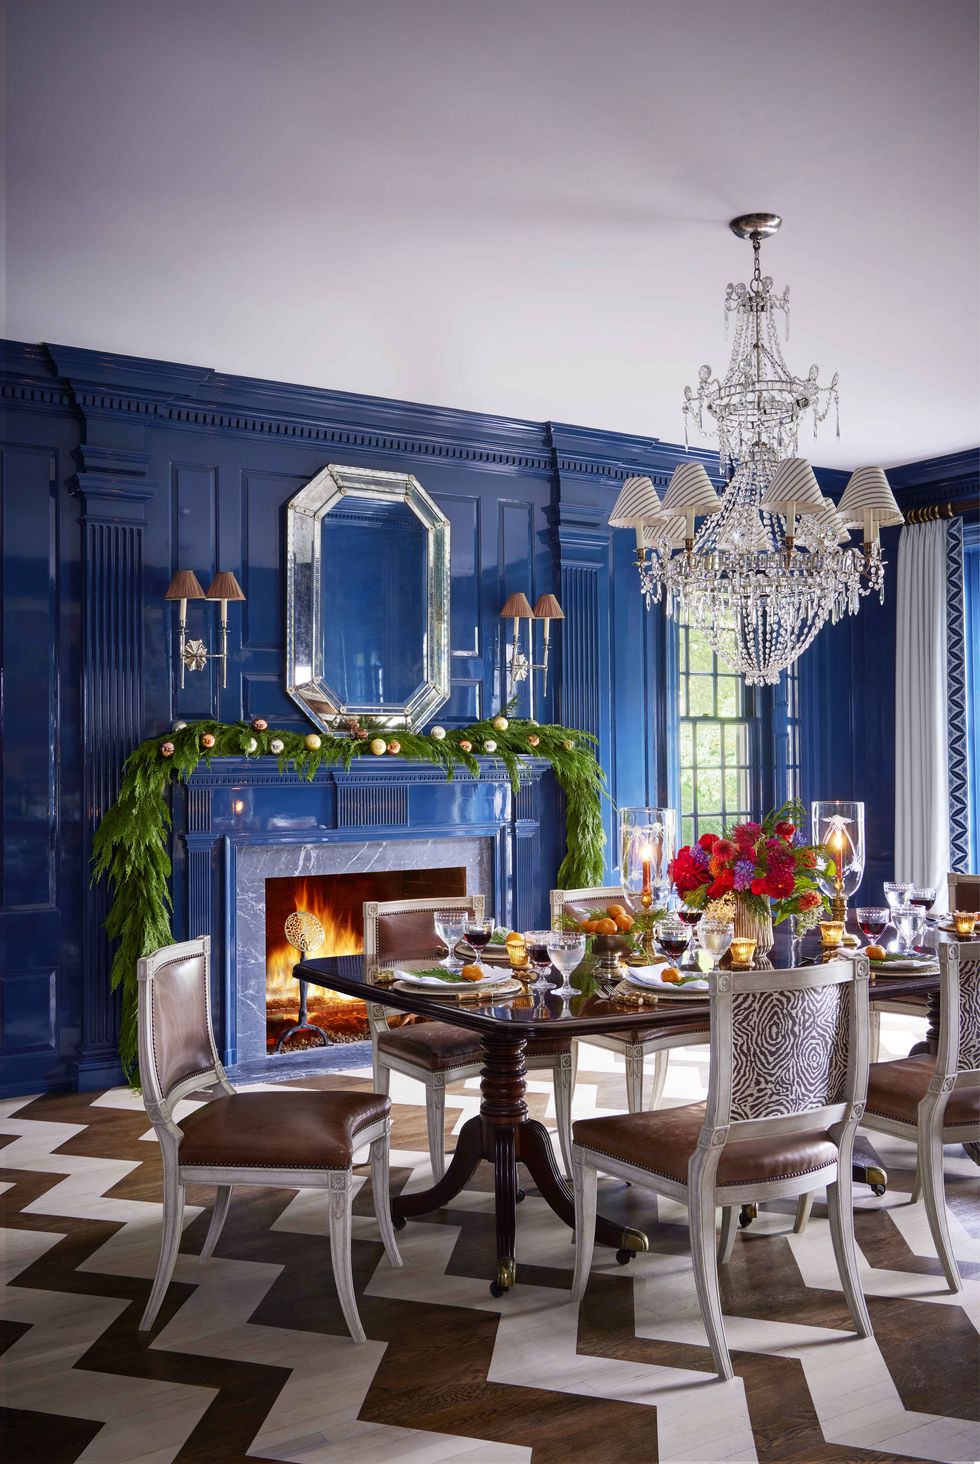 17 Boldly Beautiful Dining Room Ideas From the Pages of AD